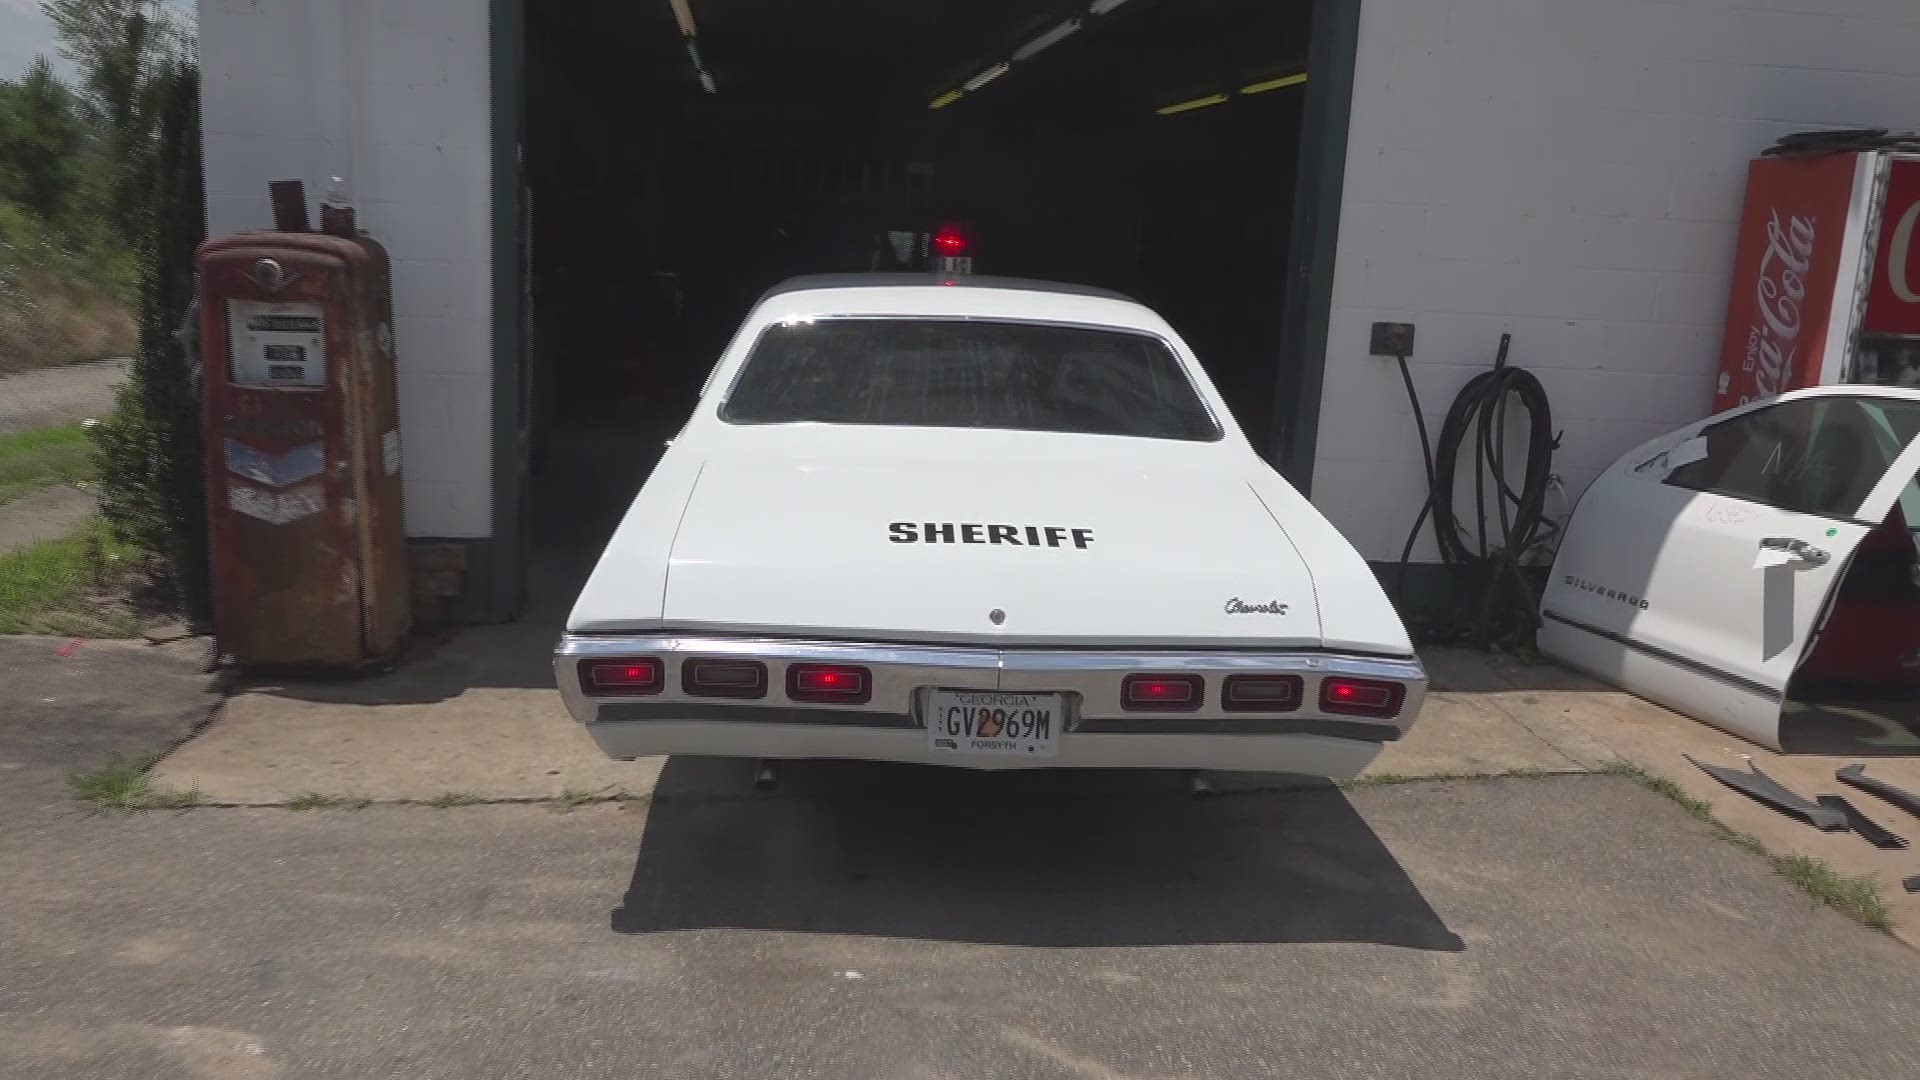 A local body shop is restoring a vintage car that will eventually be part of a memorial for officers killed in Forsyth County.